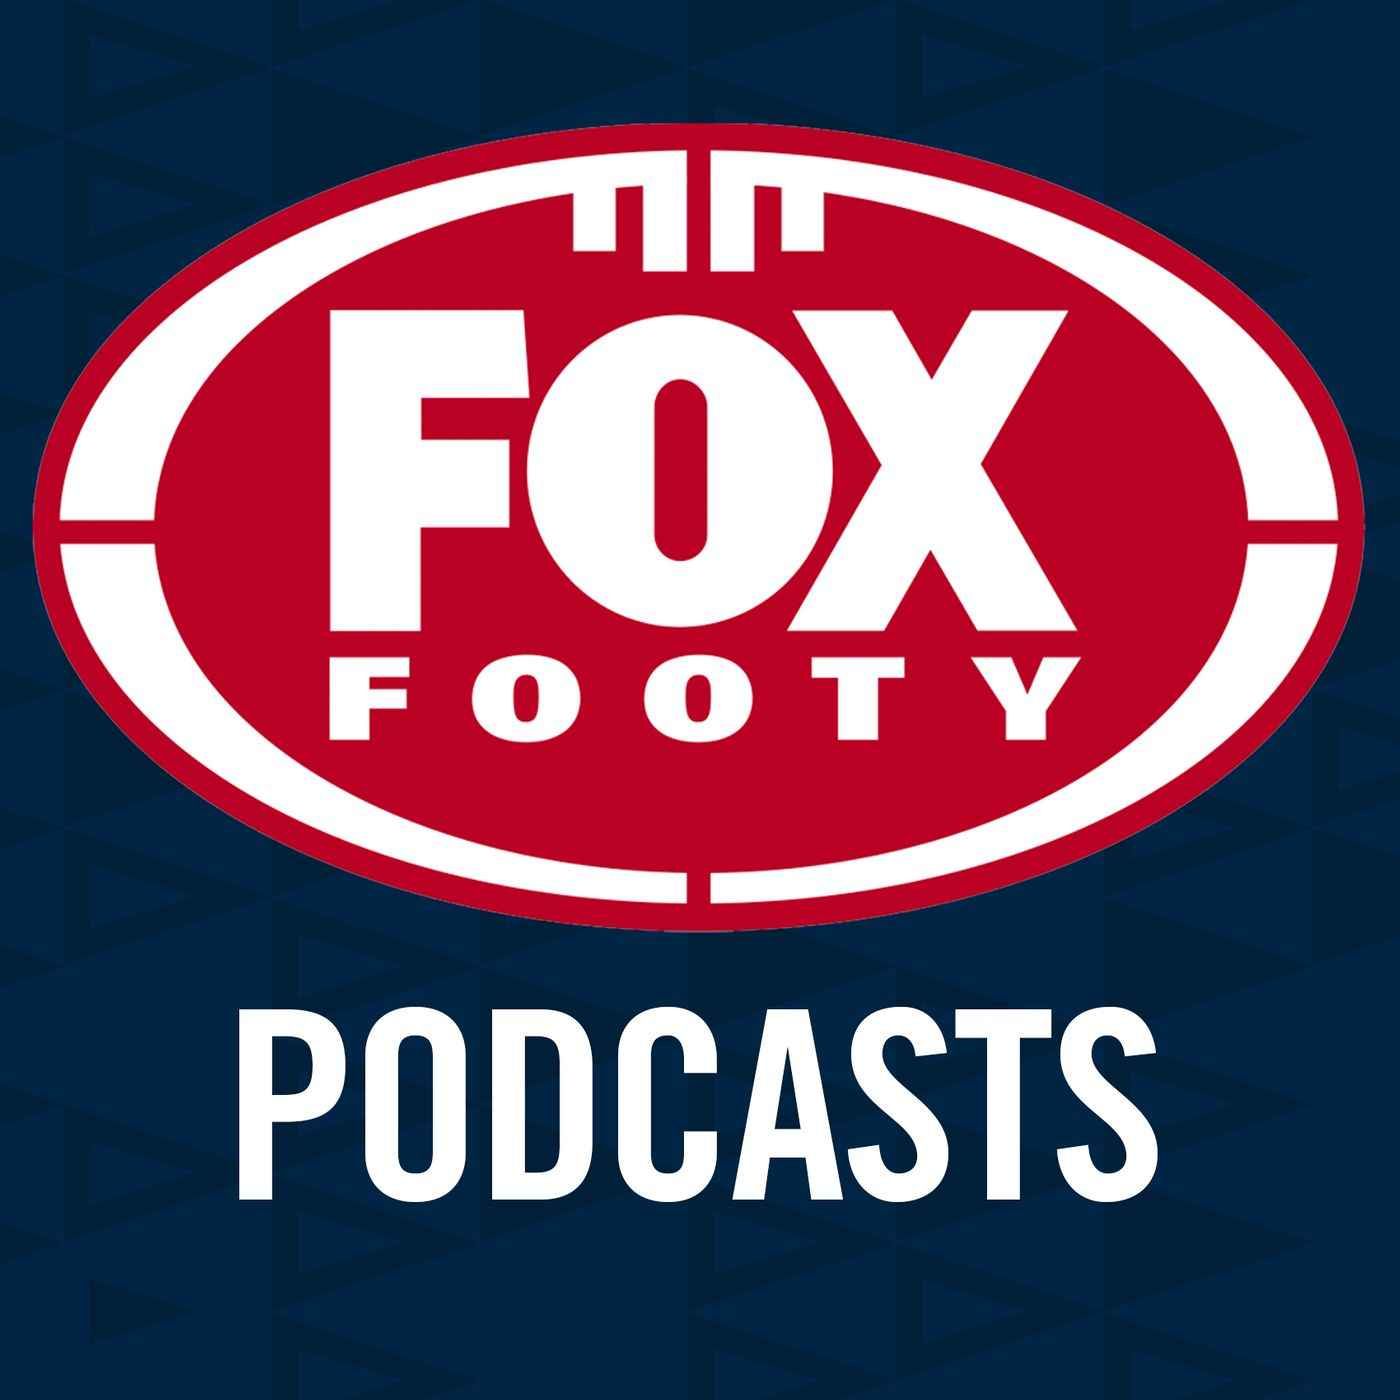 Fox Footy Podcast: Swans then who? The bizarre finals race